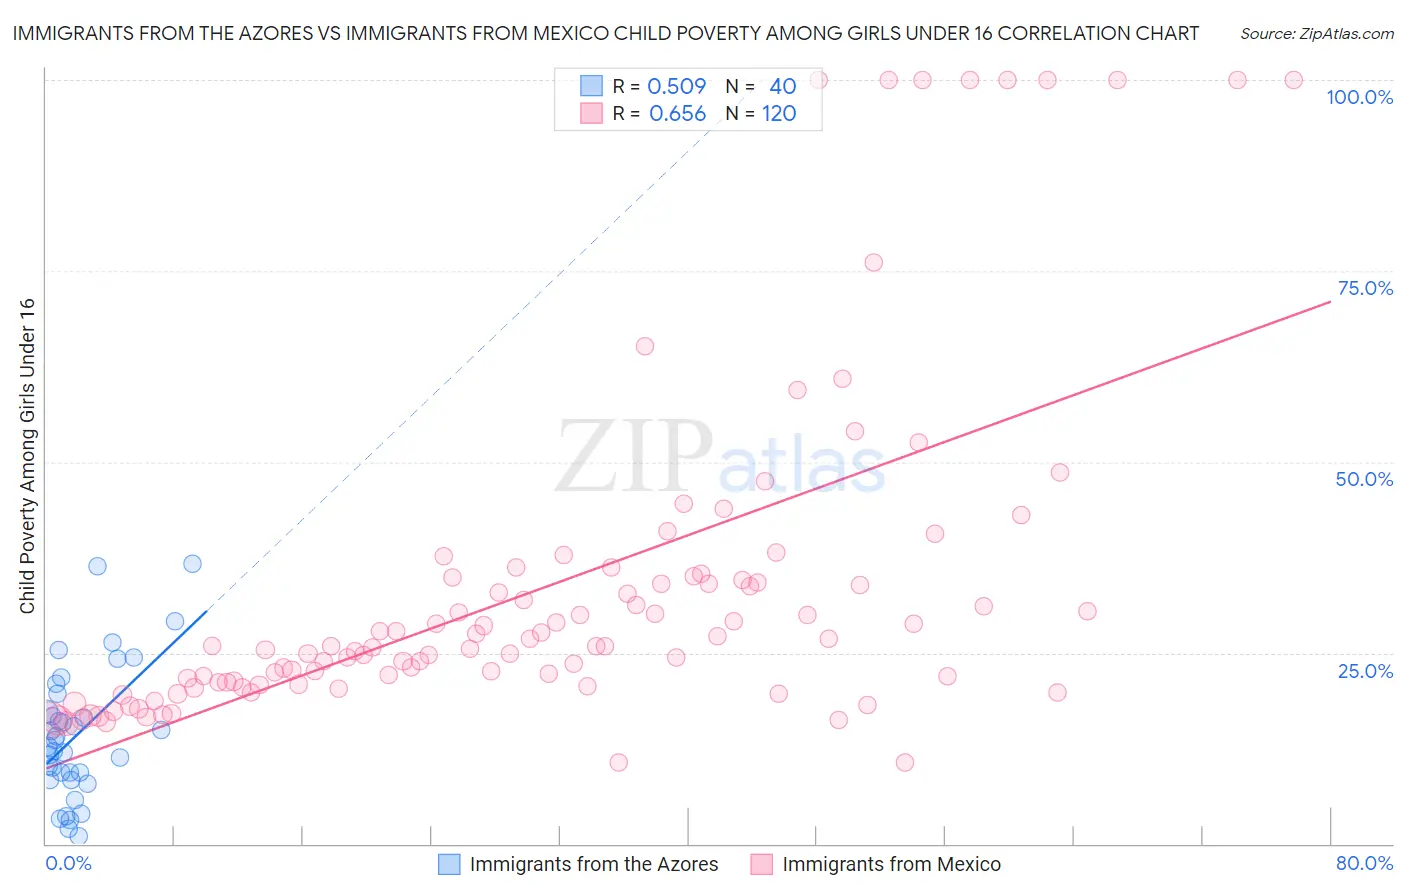 Immigrants from the Azores vs Immigrants from Mexico Child Poverty Among Girls Under 16